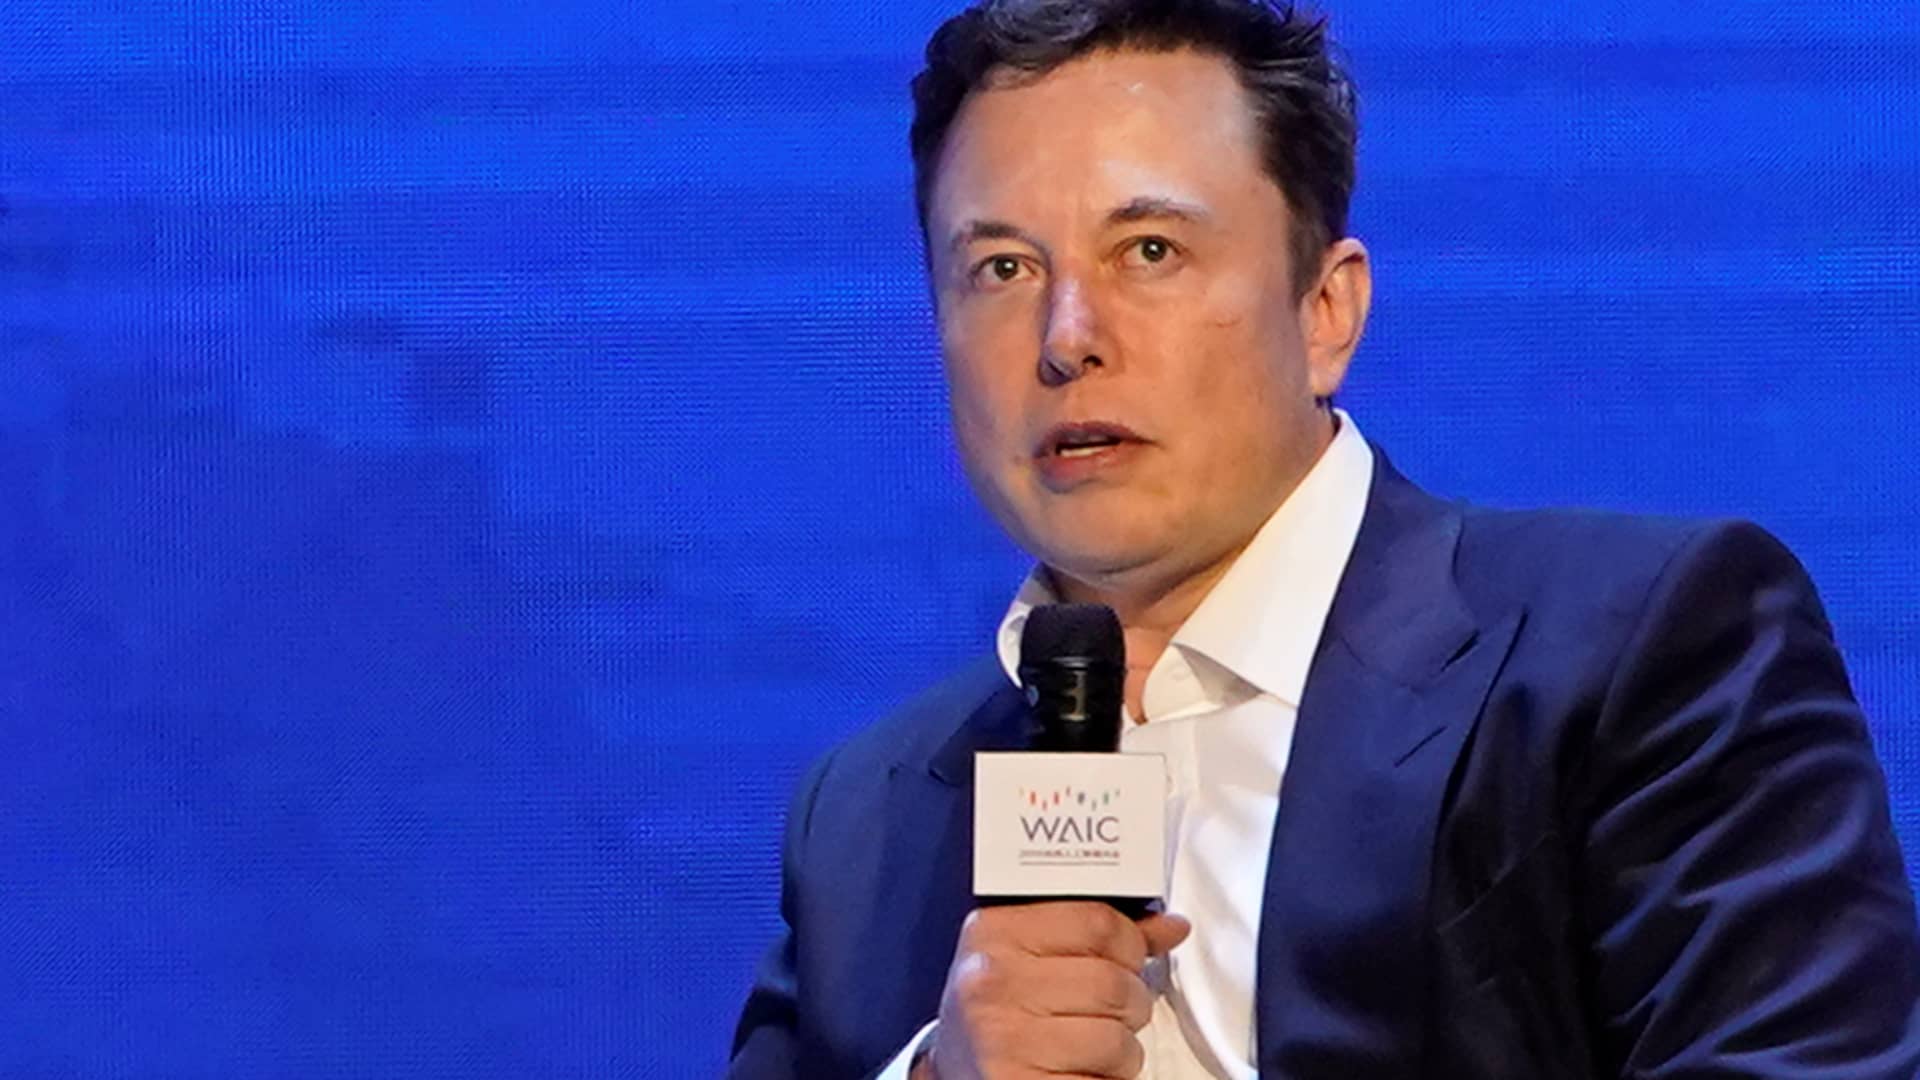 Elon Musk says he doesn't want to be a CEO, walks back SEC insults